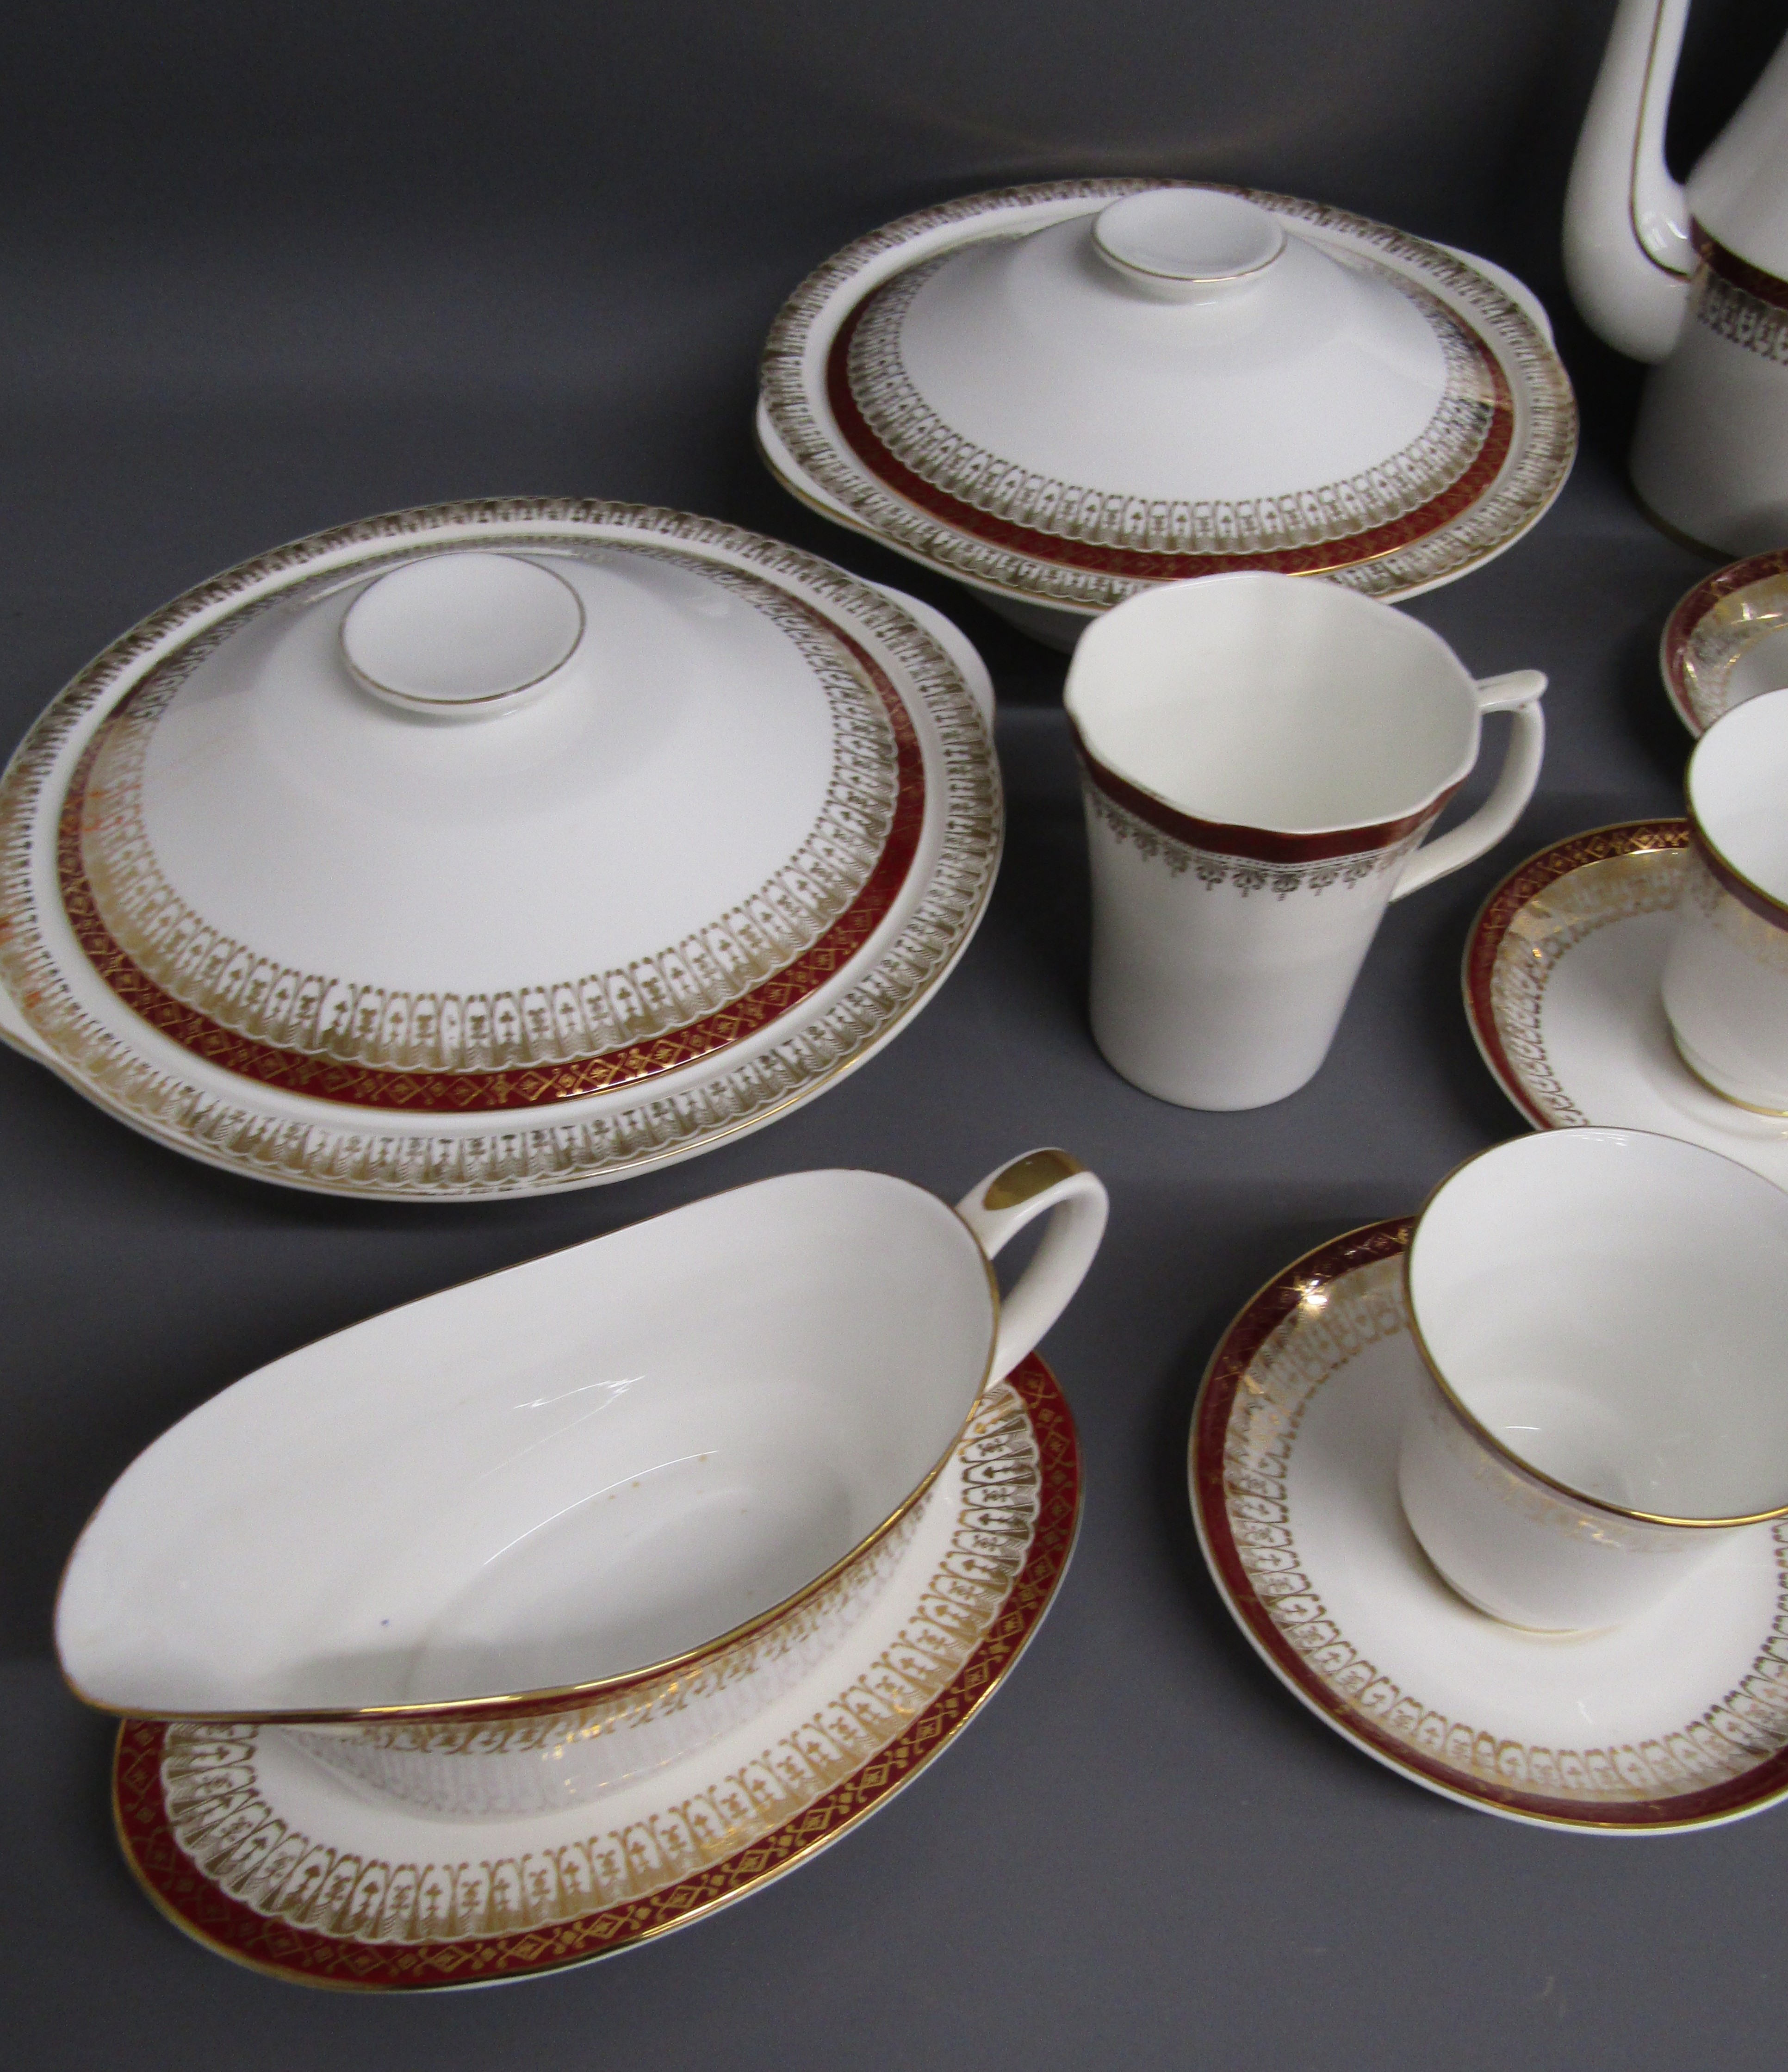 Royal Grafton 'Majestic' tea set with side plates and 20.5cm plates, tureens and gravy boat - Image 2 of 5